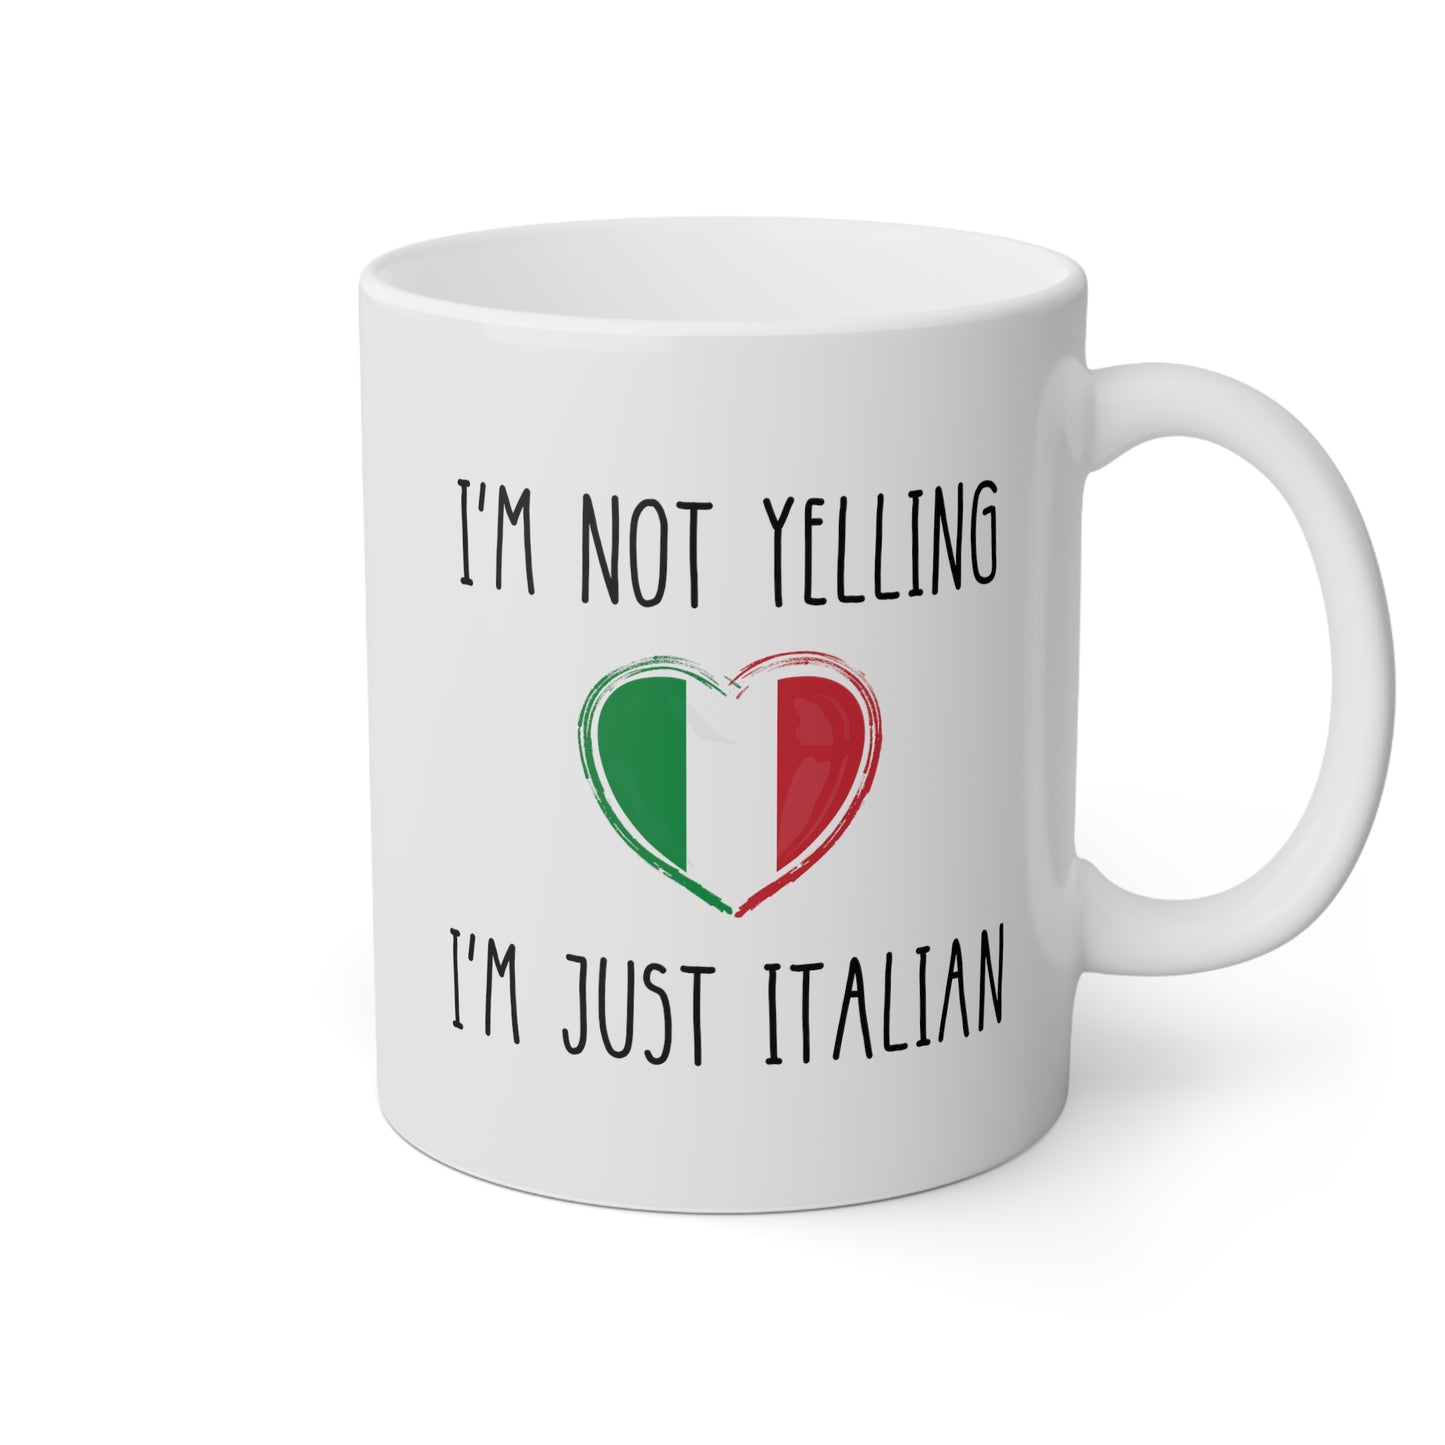 I'm Not Yelling I'm Just Italian 11oz white funny large coffee mug gift for italy love loud italiana italiano waveywares wavey wares wavywares wavy wares